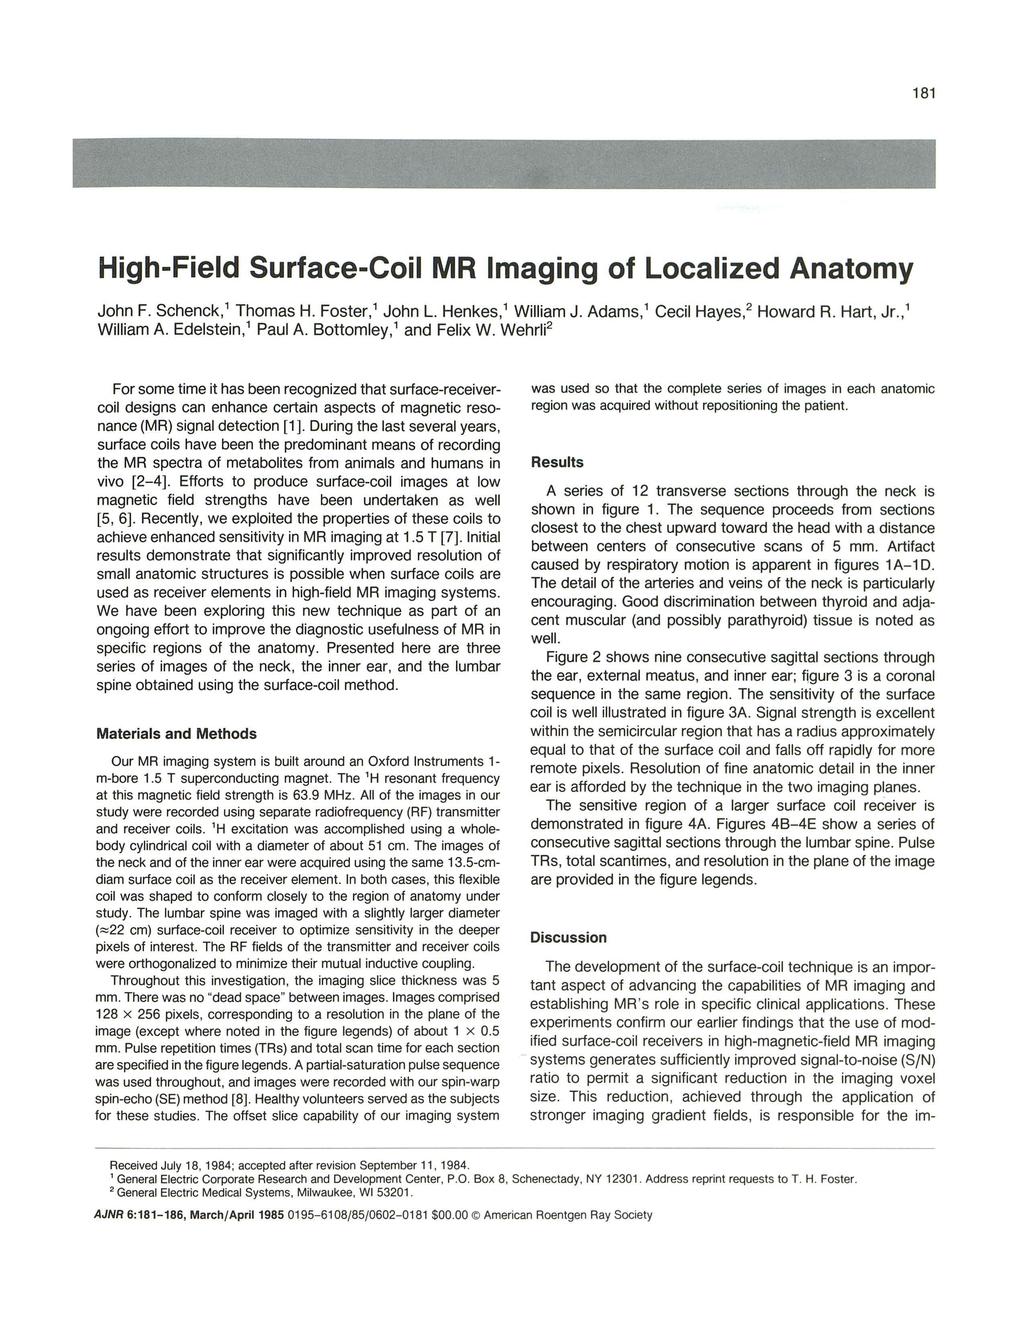 181 High-Field Surface-Coil MR Imaging of Localized Anatomy John F. Schenck,' Thomas H. Foster,' John l. Henkes,' William J. Adams,' Cecil Hayes,2 Howard R. Hart, Jr.,' William A. Edelstein,' Paul A.